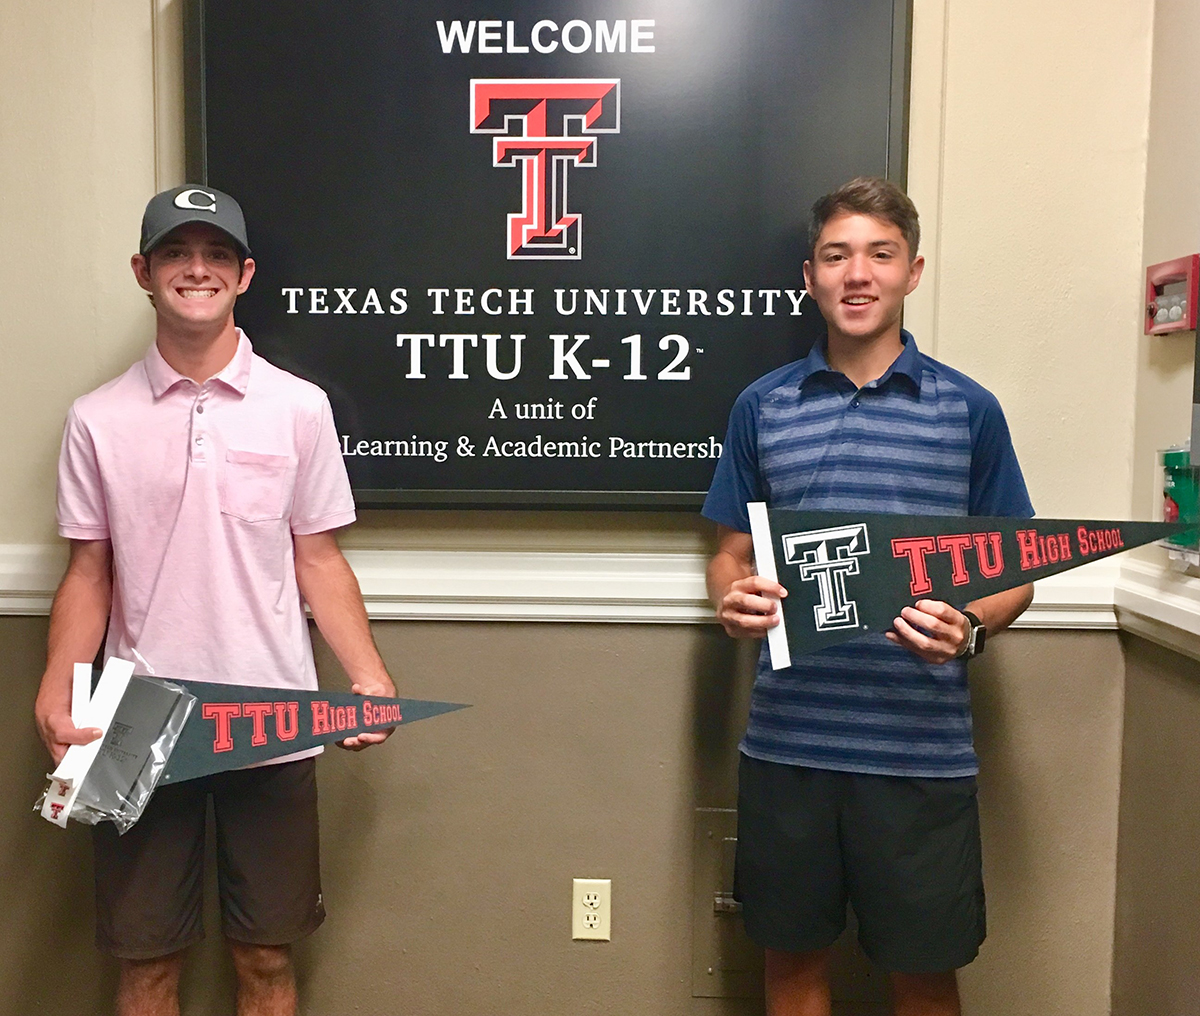 Mikey and Zach stand next to one another one both sides of a TTU K-12 framed image hanging from the wall as they both hold TTU K-12 pennant flags